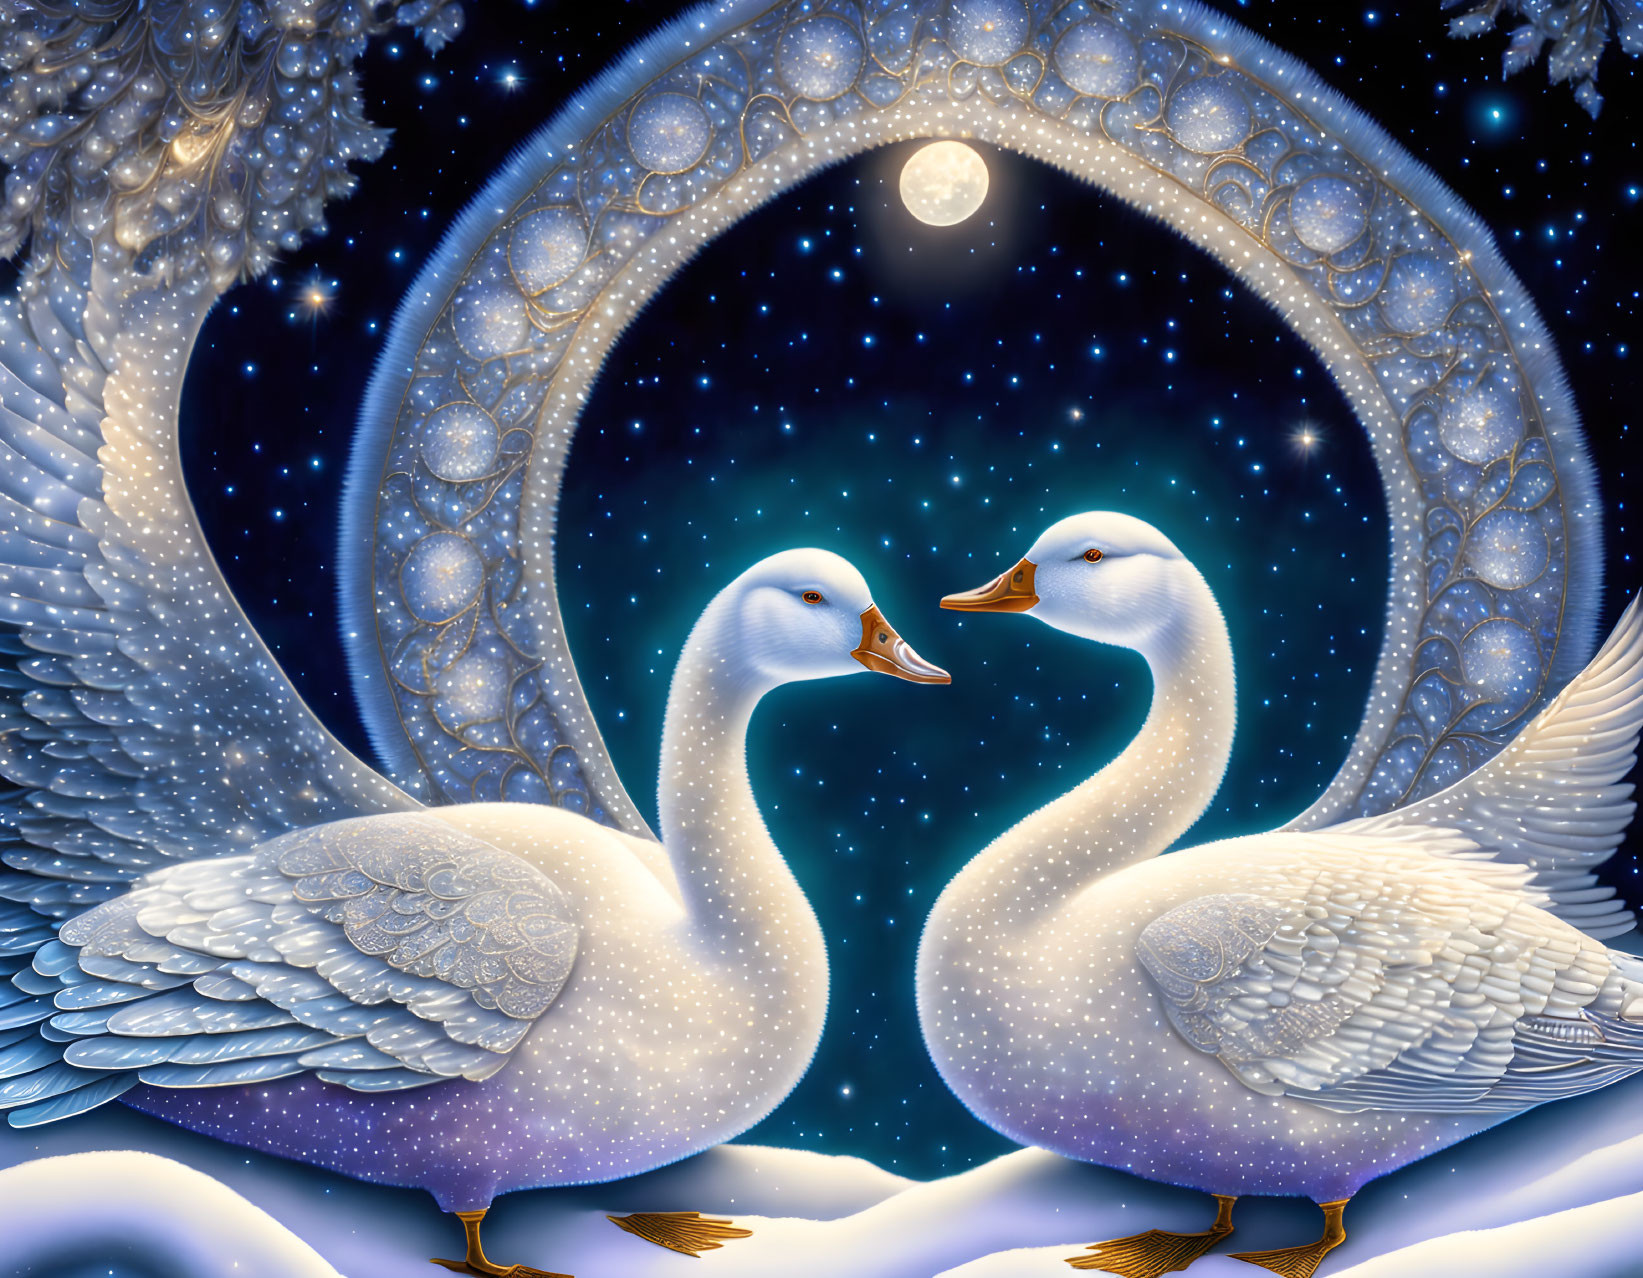 Illustrated swans with spread wings under a starry night sky and ornate moon.